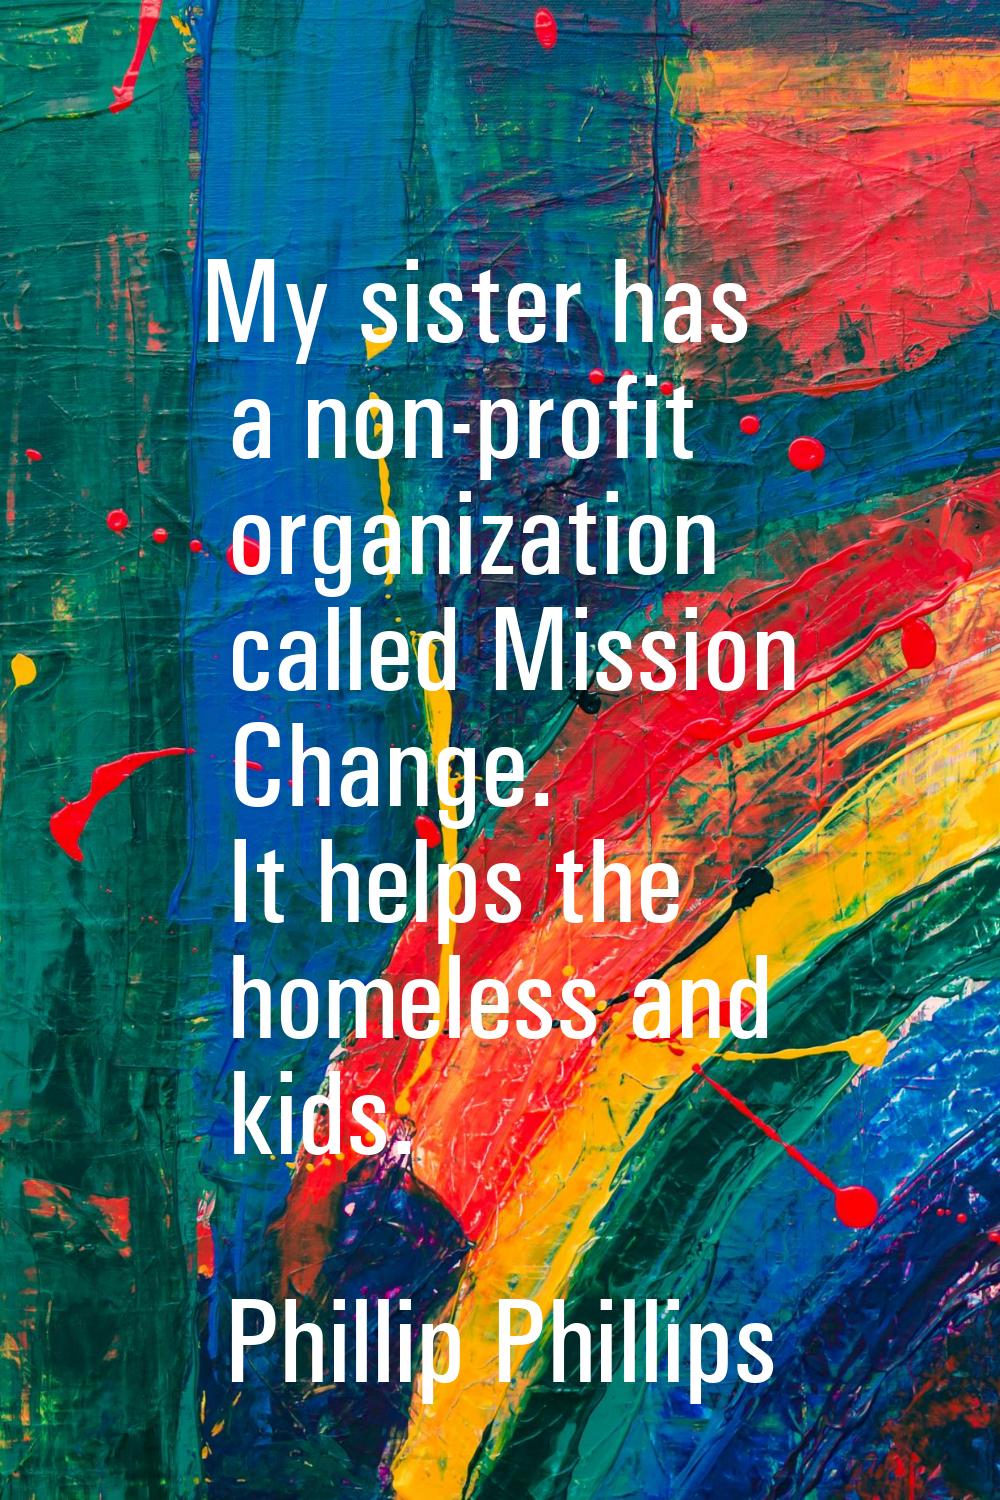 My sister has a non-profit organization called Mission Change. It helps the homeless and kids.